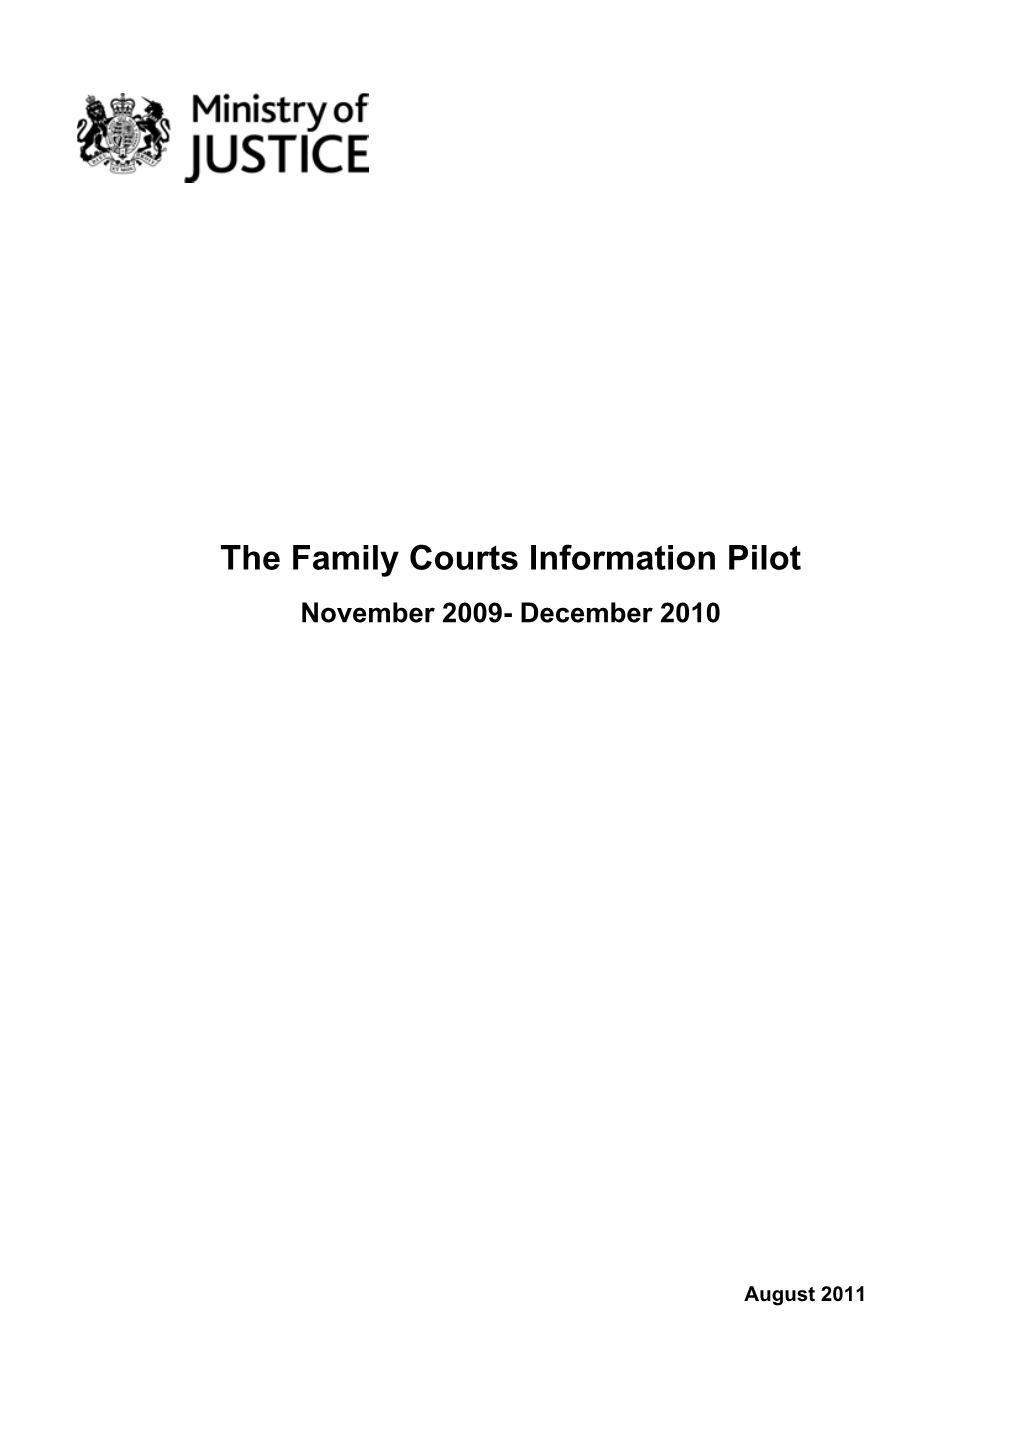 The Family Courts Information Pilot November 2009- December 2010